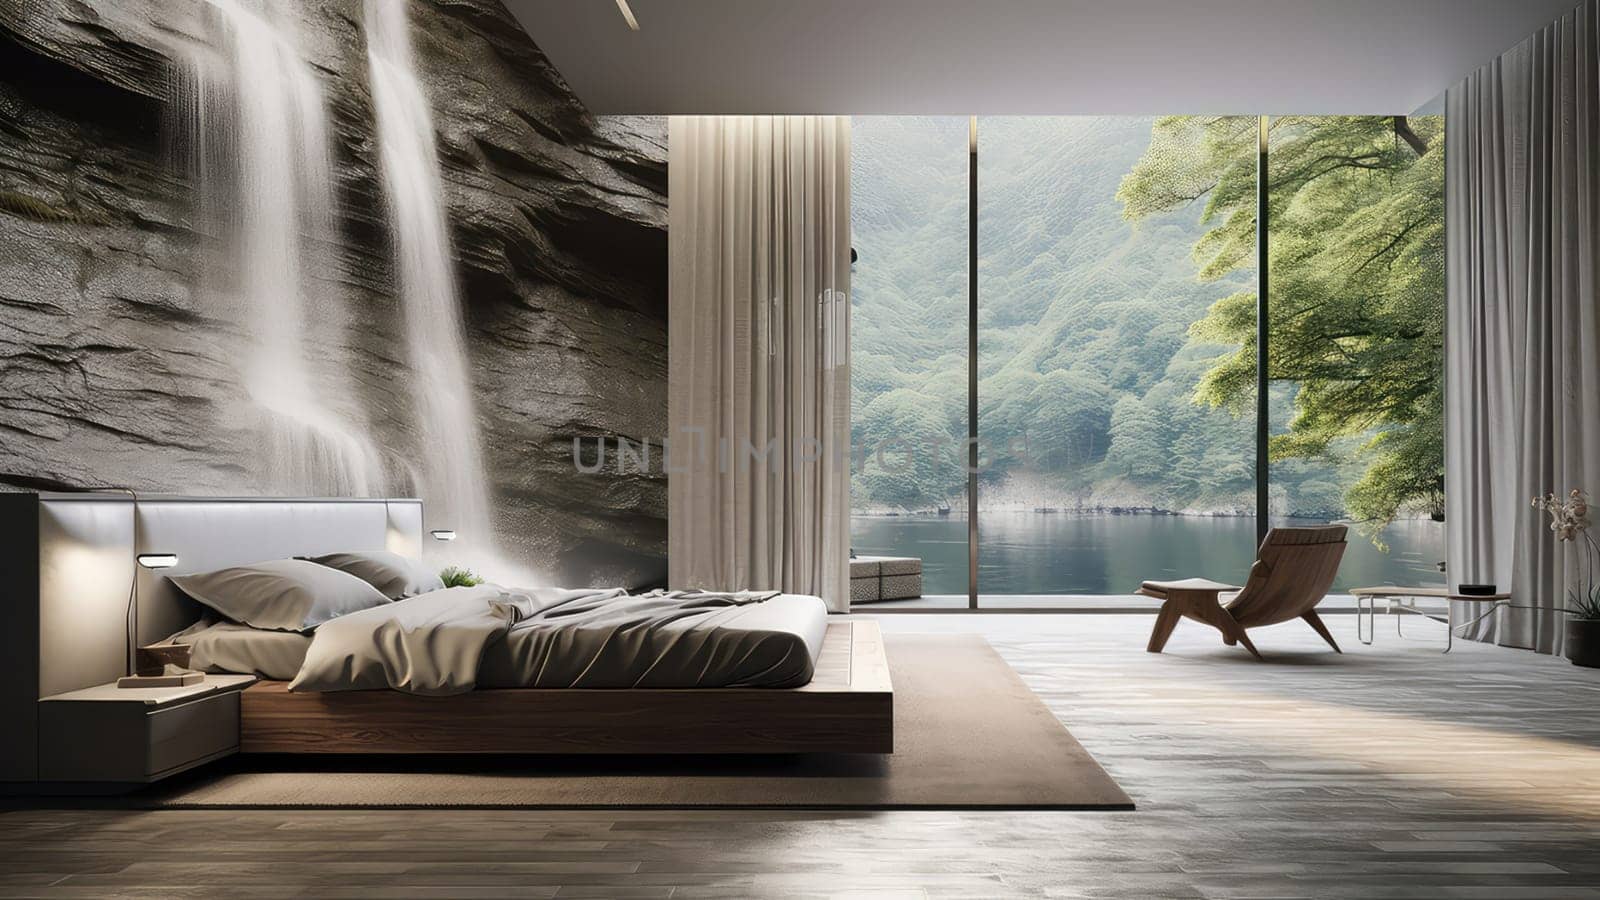 3D Rendering of a bedroom with a waterfall wallpaper. The waterfall is flowing down a rock face, creating a sense of tranquility and peace.